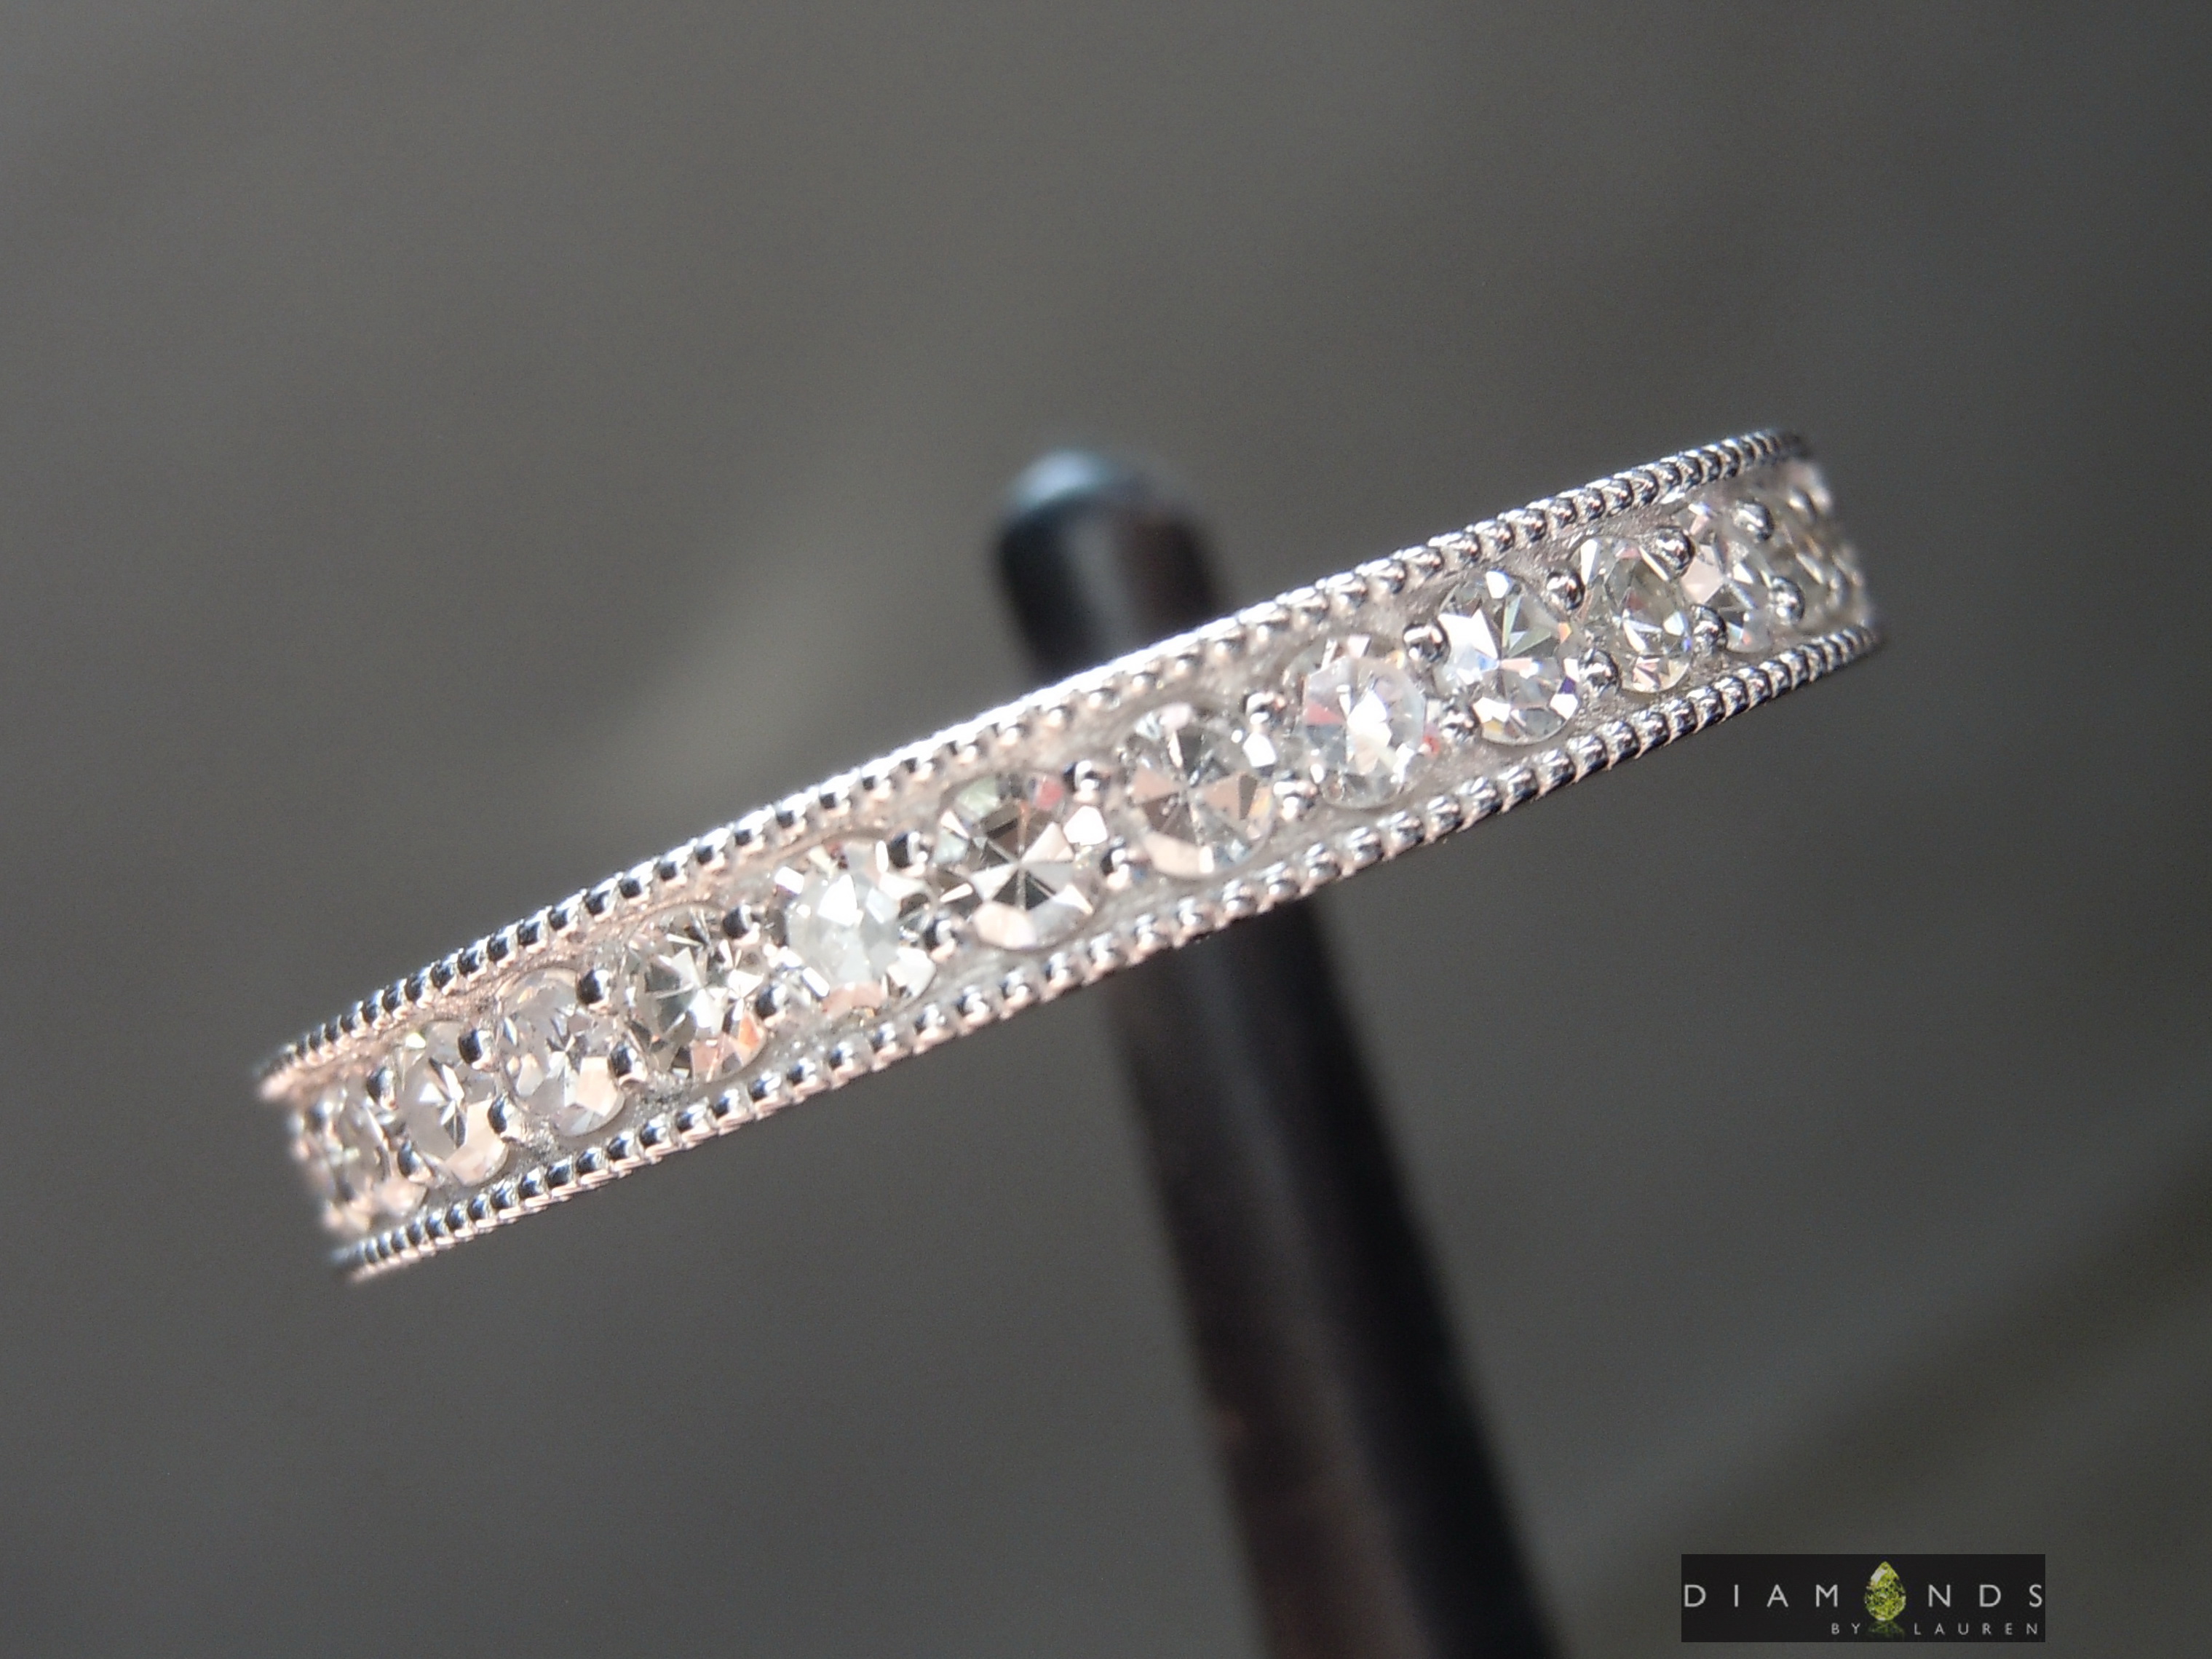 completely colorless diamond ring